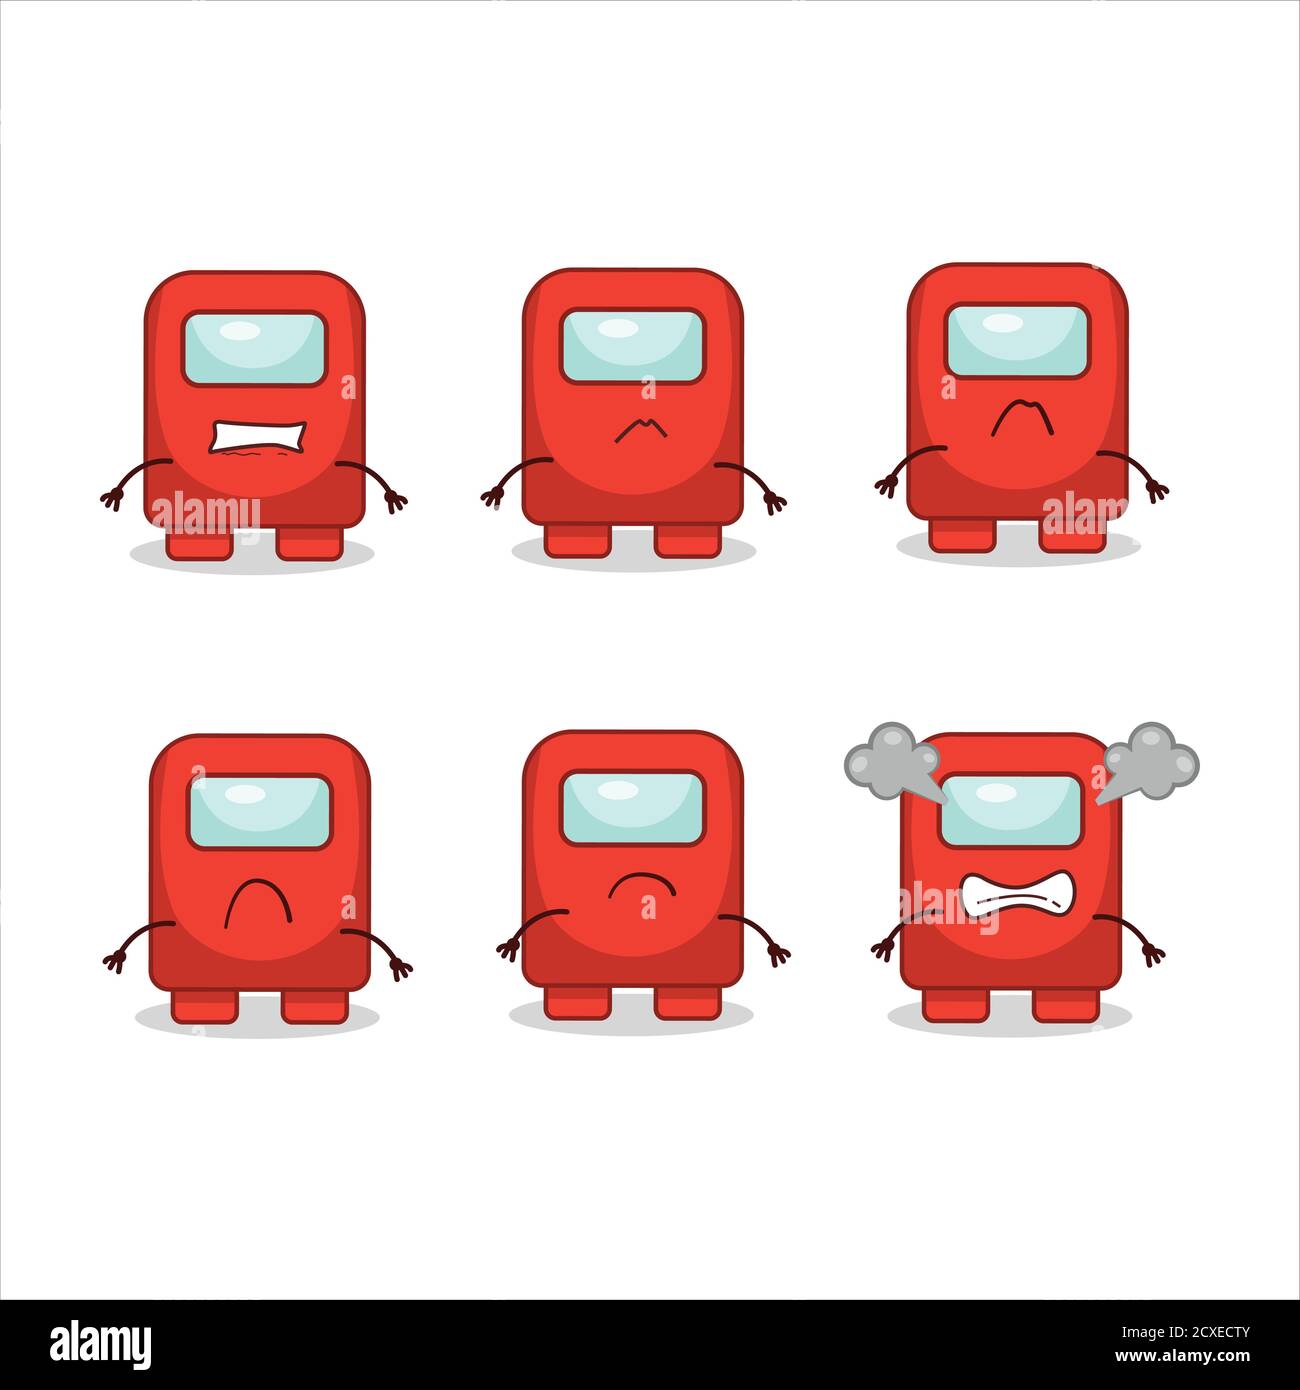 Among us red cartoon character with various angry expressions Stock Vector